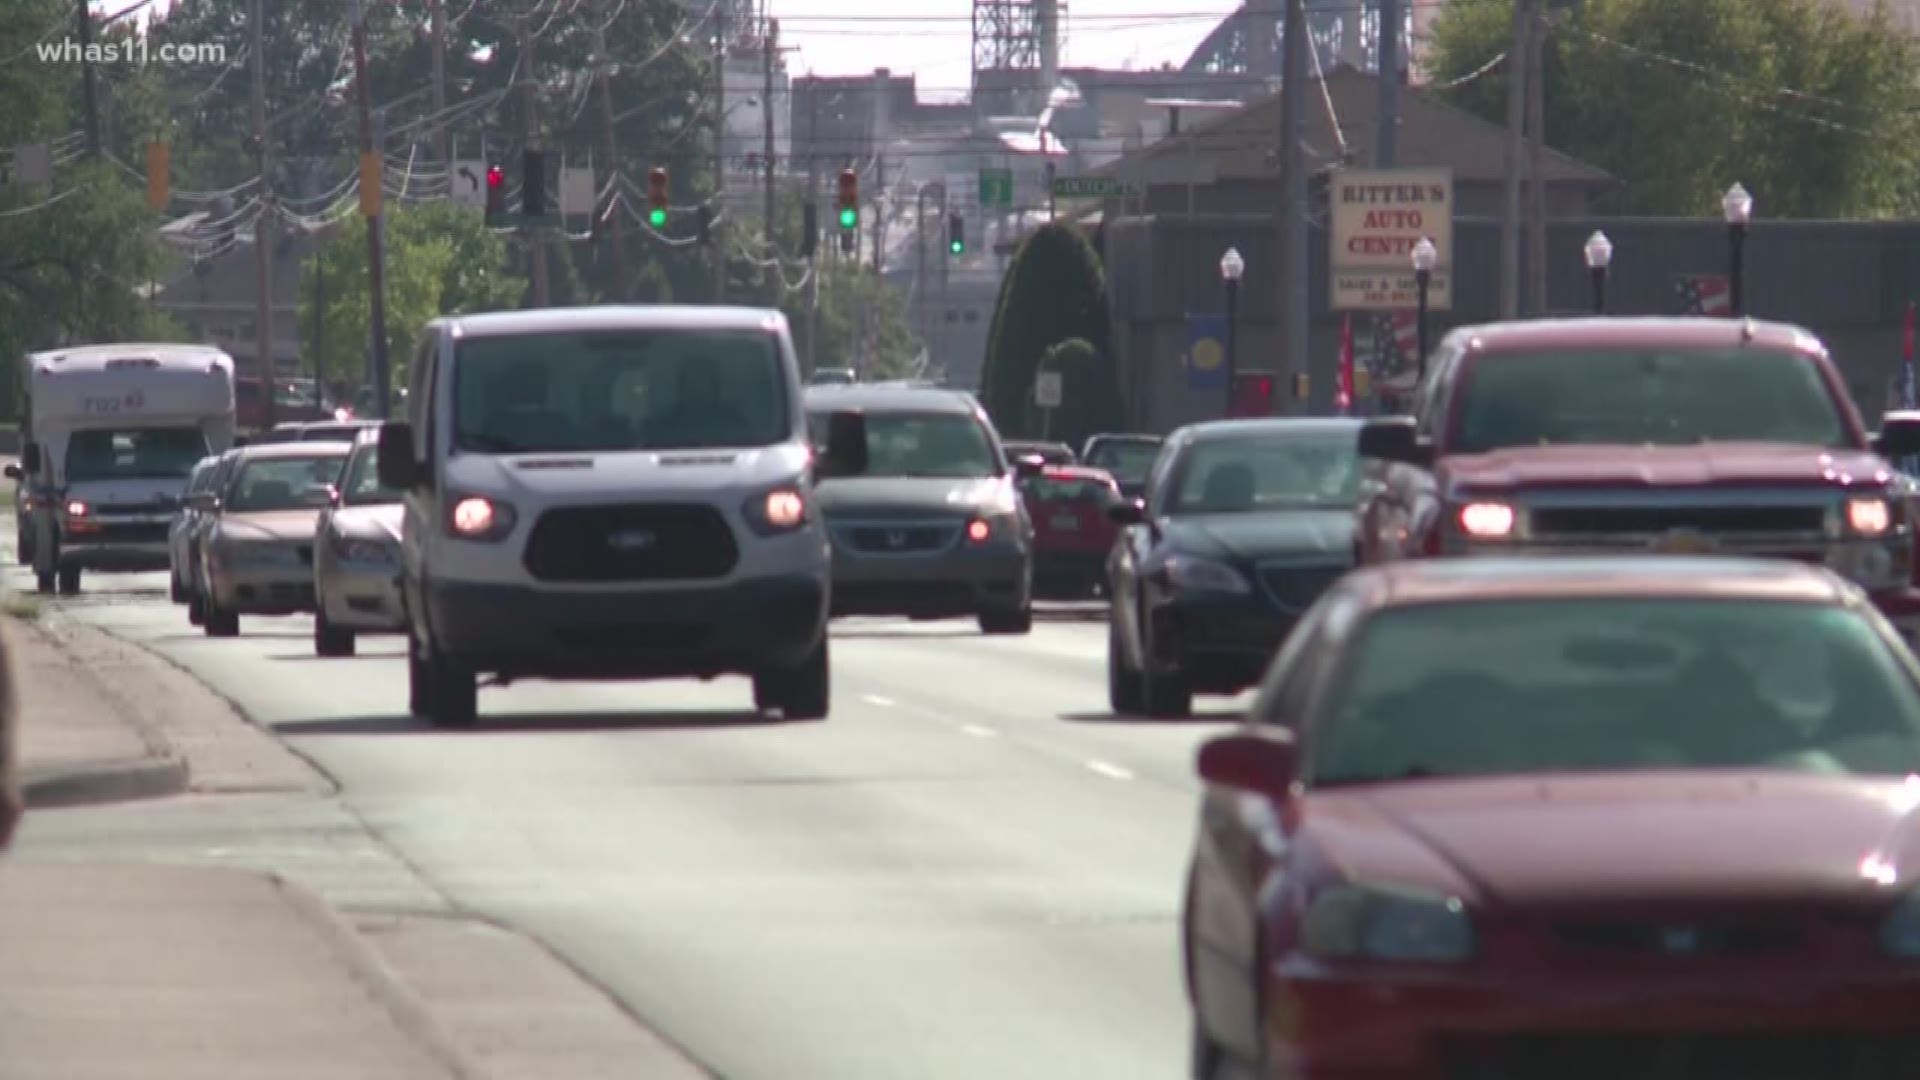 The City of Jeffersonville is celebrating $1.5 million they did not have to spend on the 10th Street Revitalization Project. Construction to replace and widen the road, among other improvements, concluded in June and on Thursday the city announced that the project came in under budget.